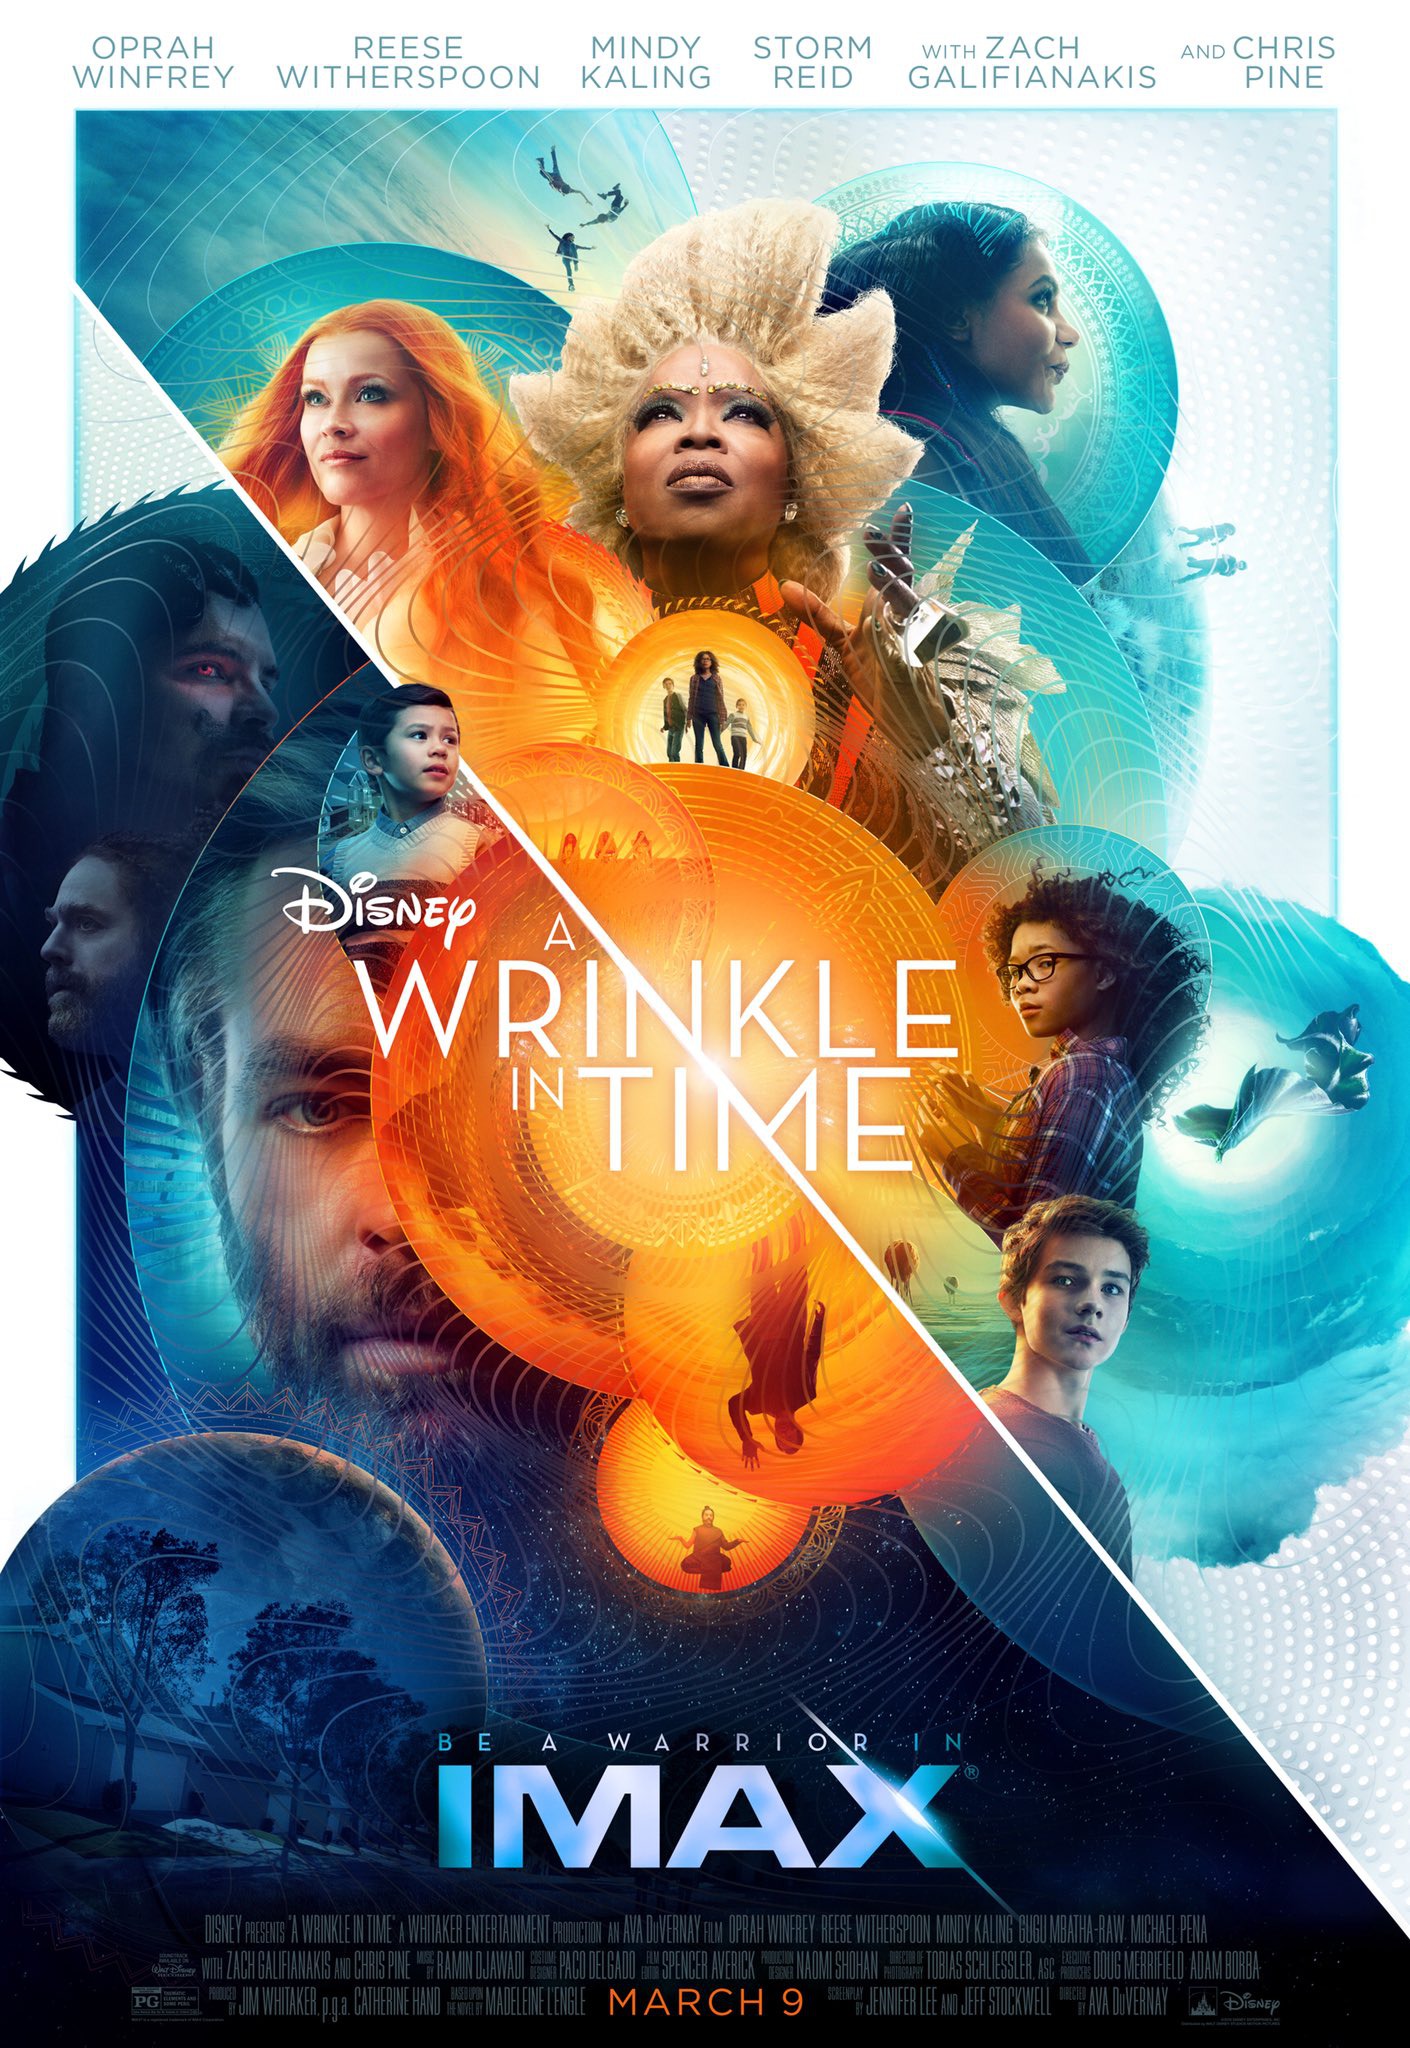 Mega Sized Movie Poster Image for A Wrinkle in Time (#14 of 17)